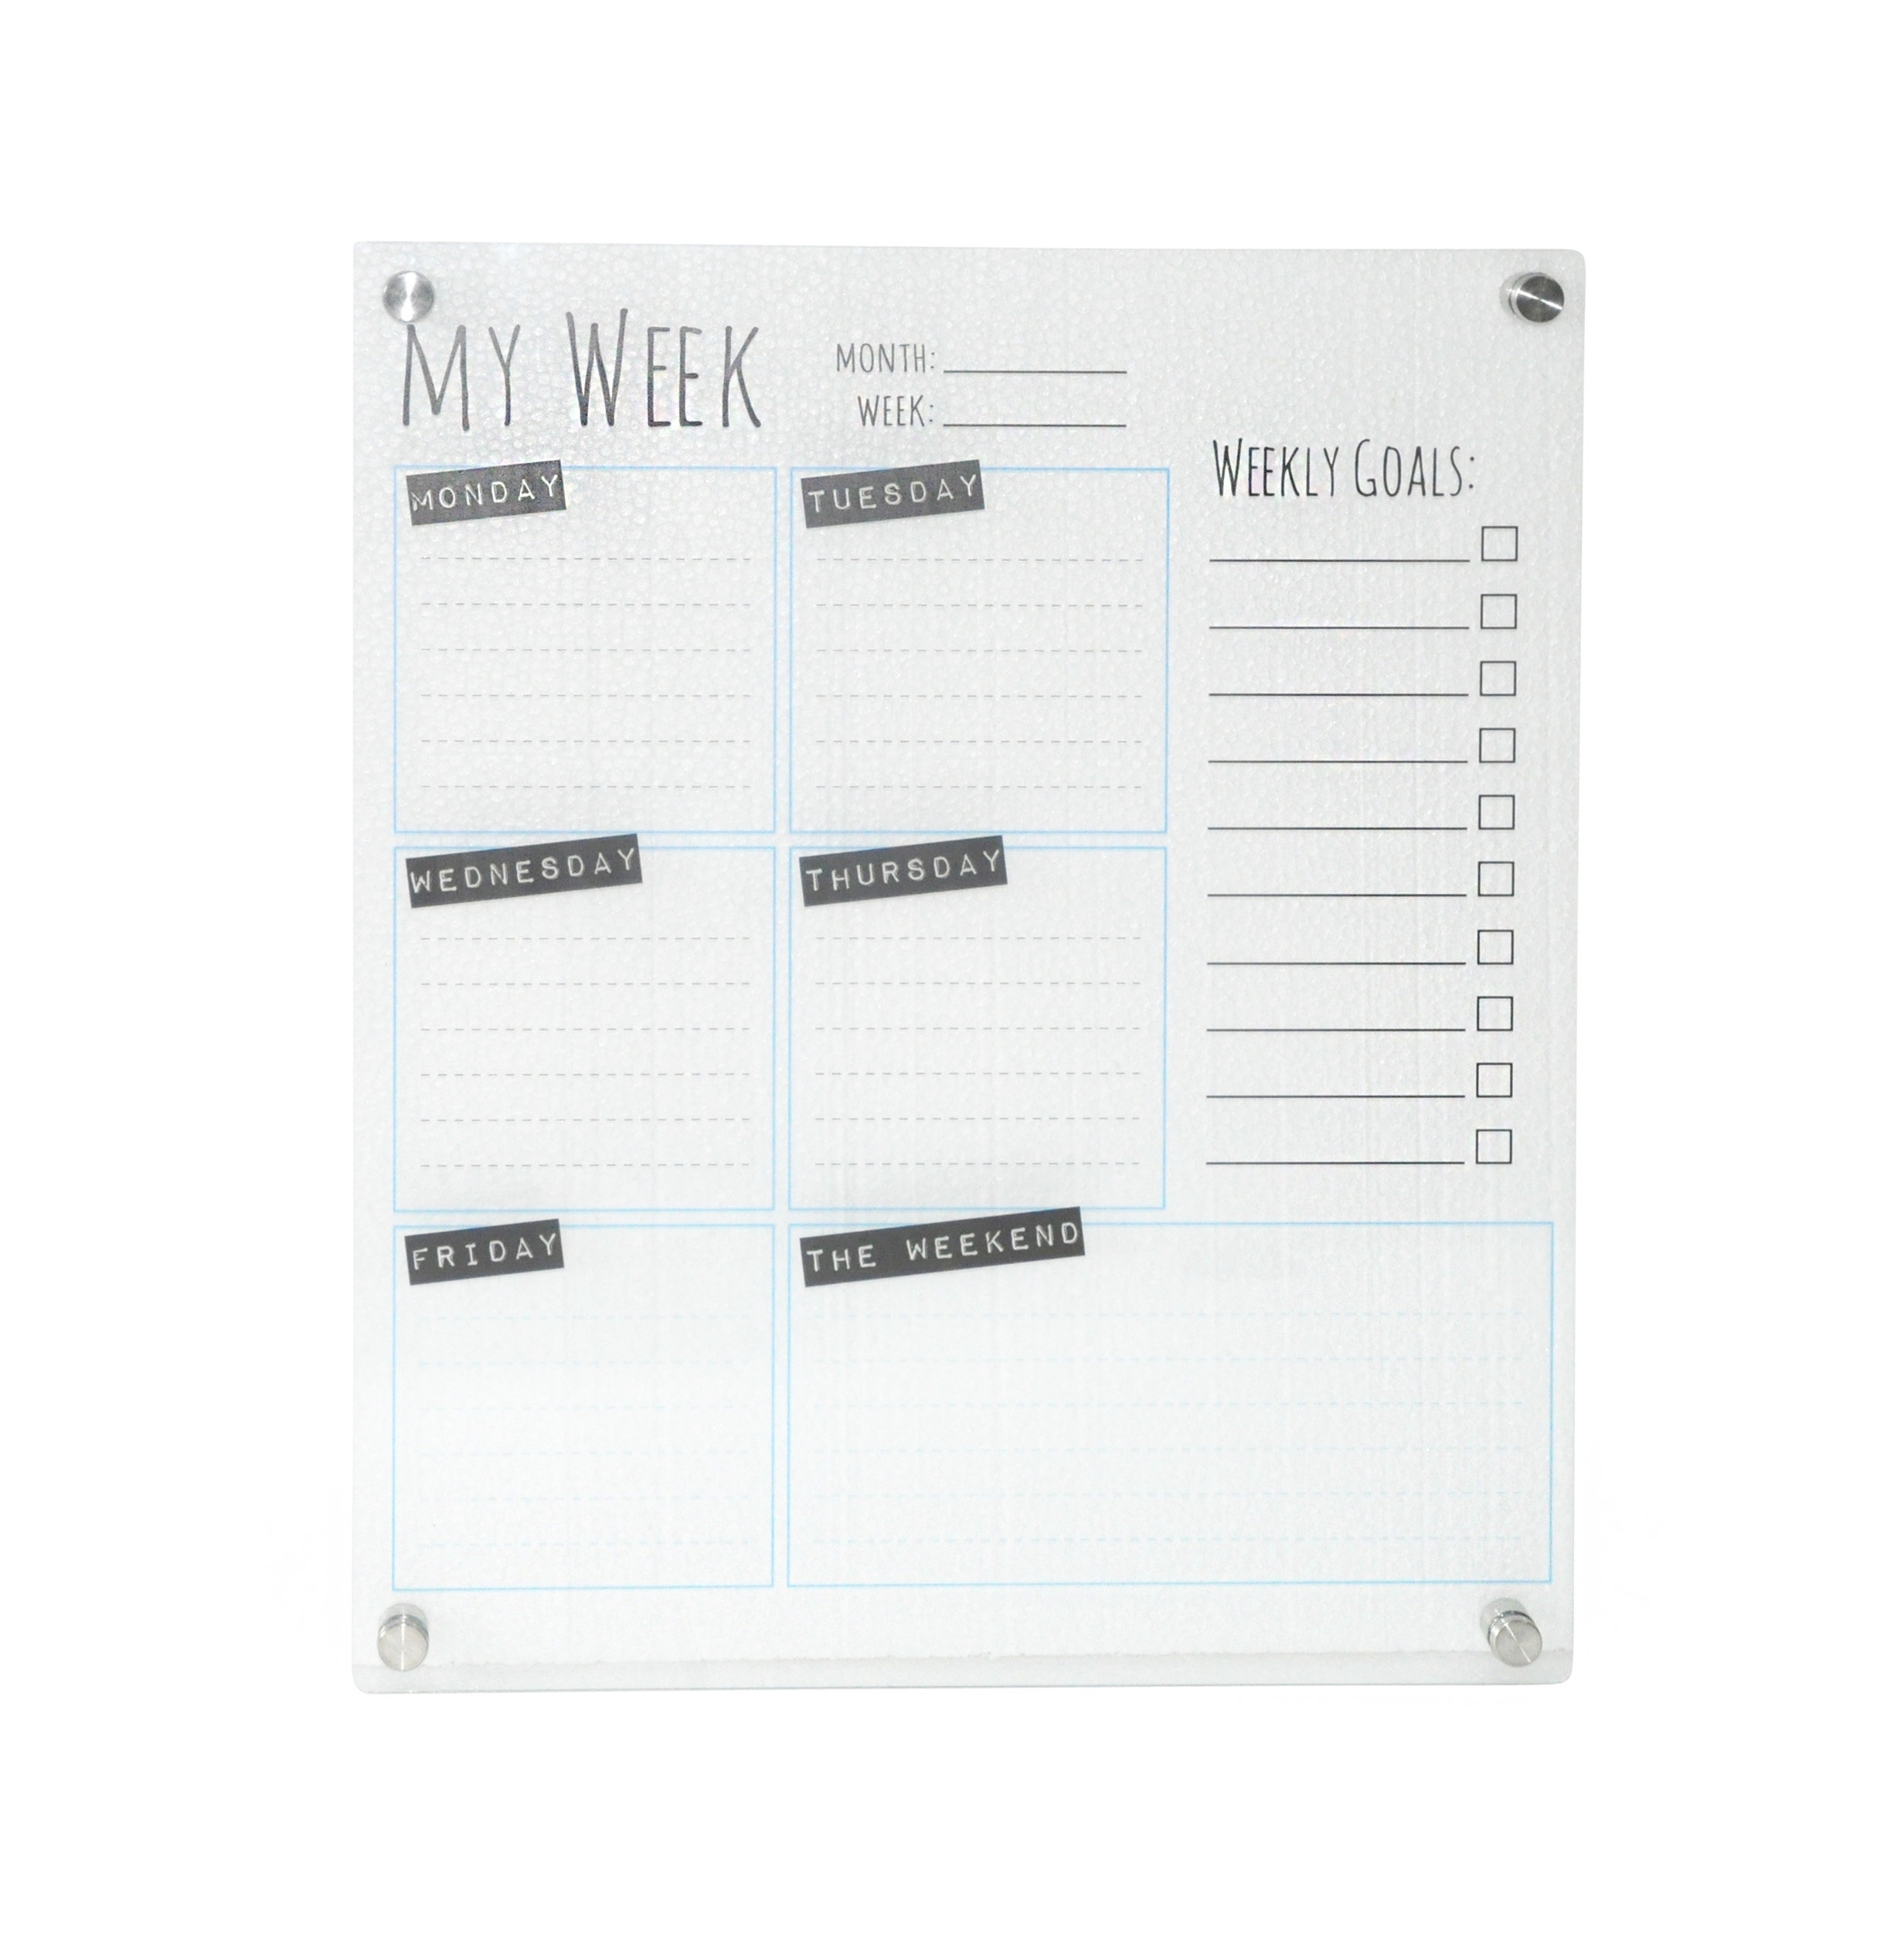 Latitude Run Acrylic Wall Mounted Dry Erase Board | Wayfair intended for Acrylic Wall Displays Fitness Schedules